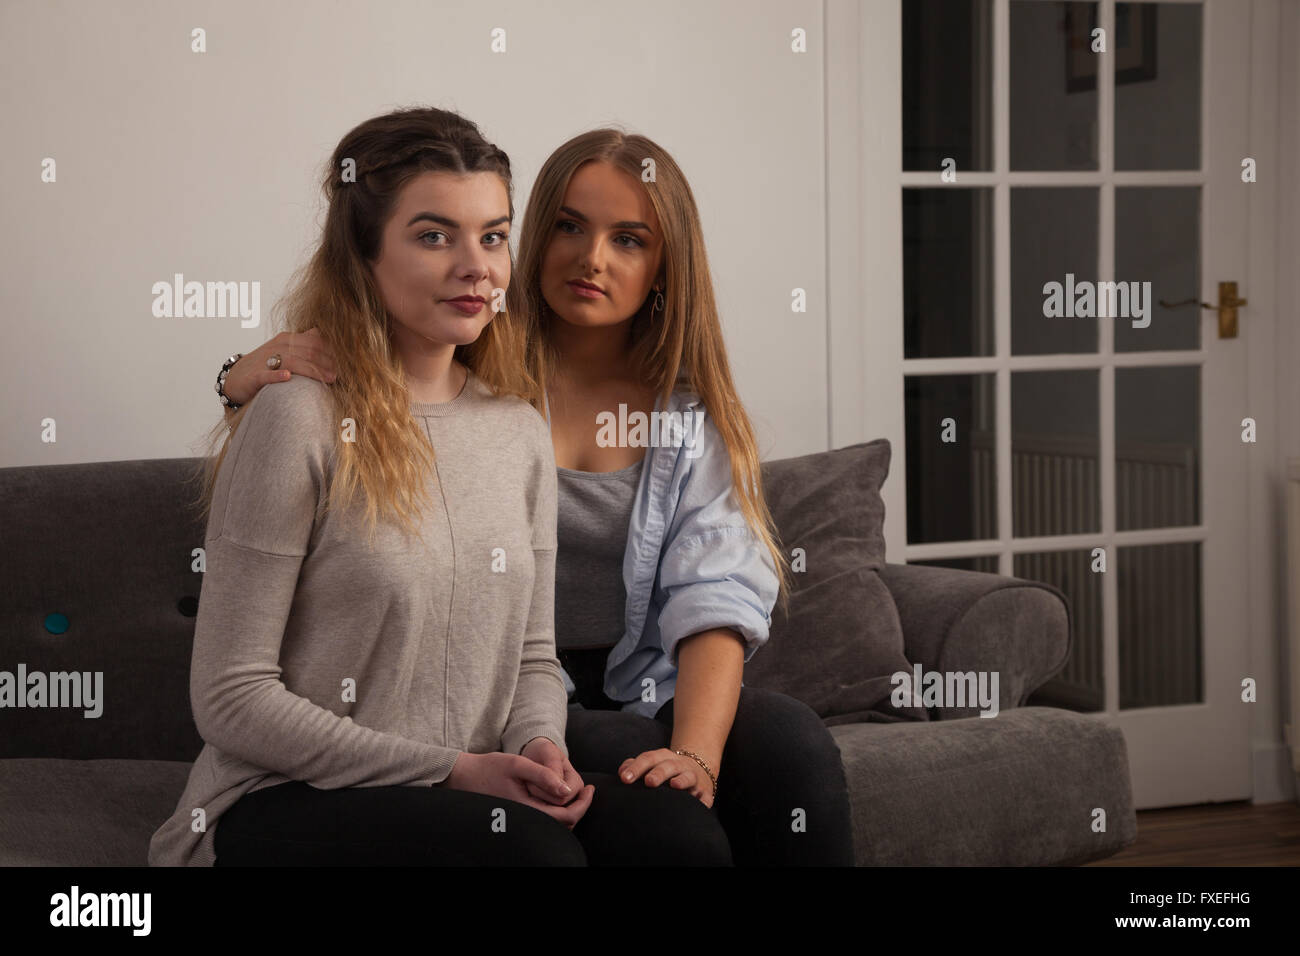 Two young women comforting each other at home on a sofa. Stock Photo